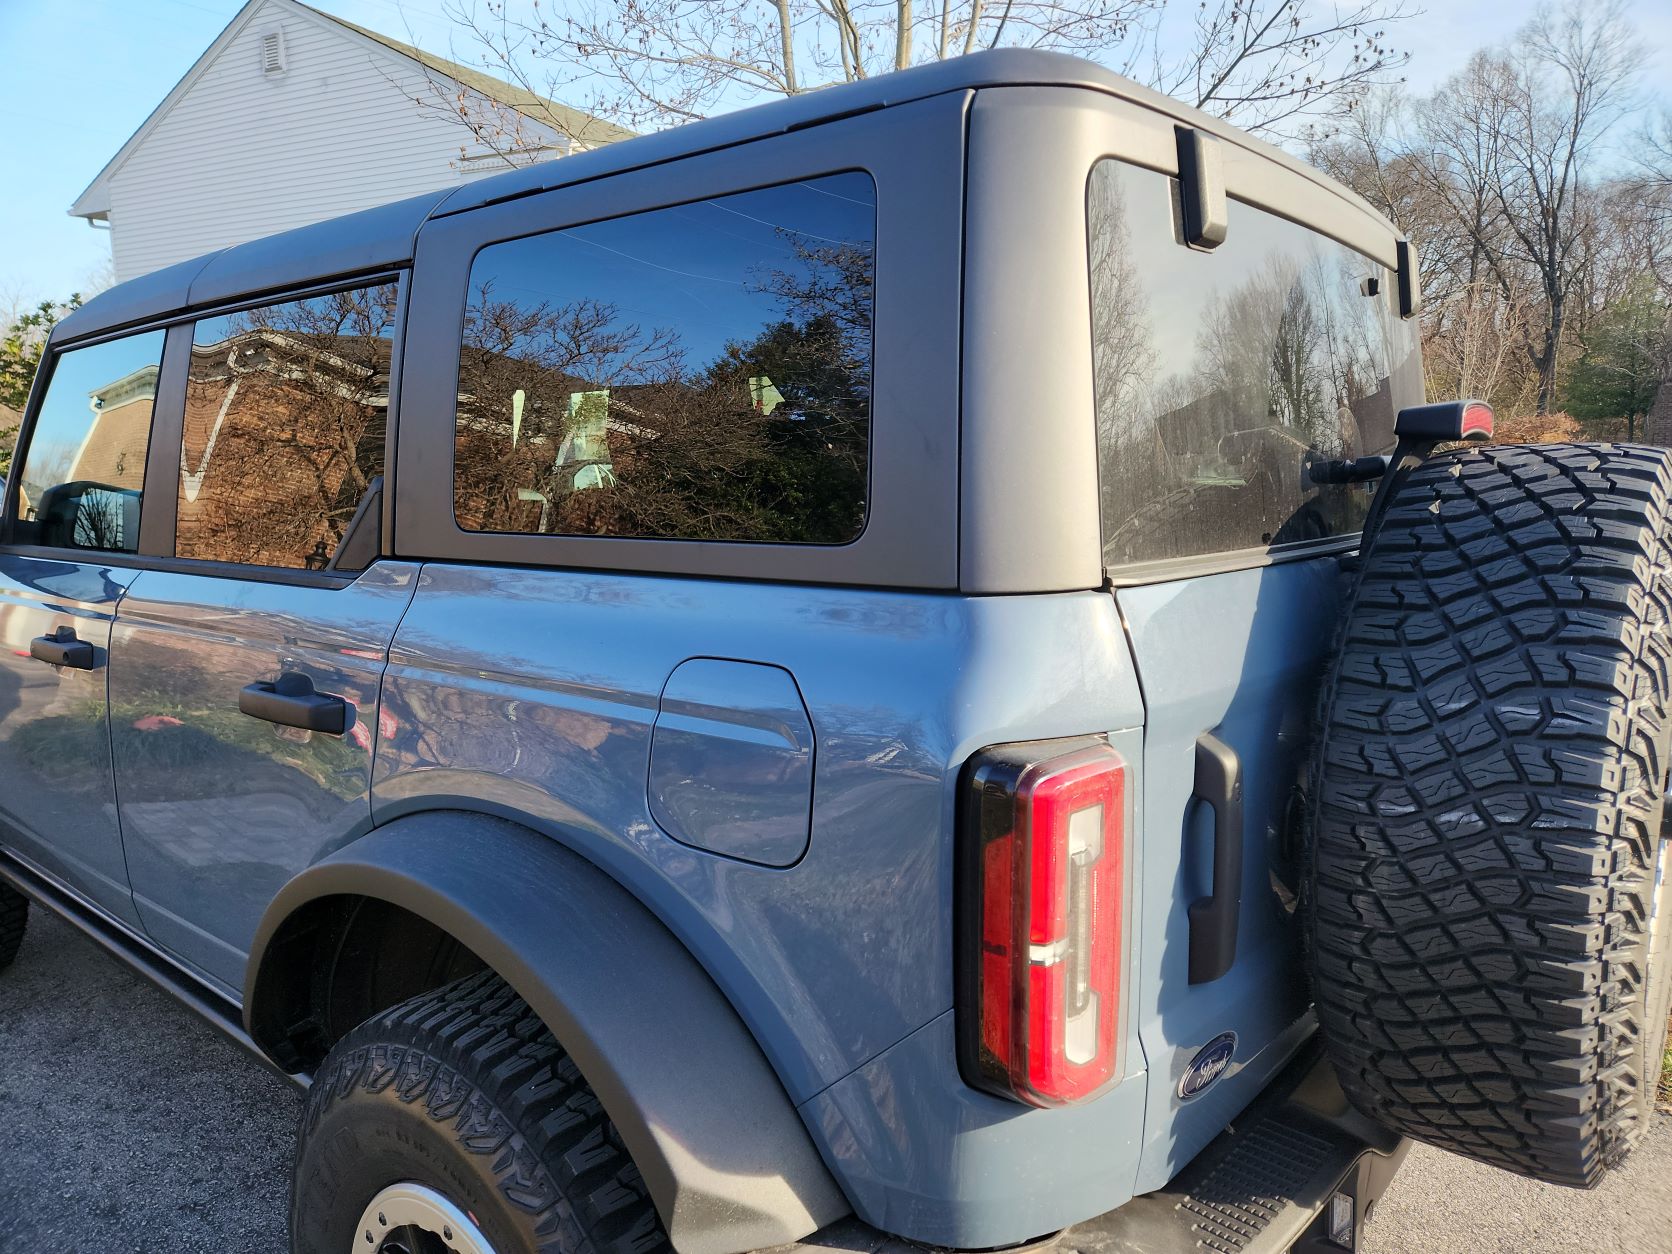 Ford Bronco Azure Gray vs Area 51 colors side-by-side comparison pics + AGM in the sun Back Drivers Sun and Shade